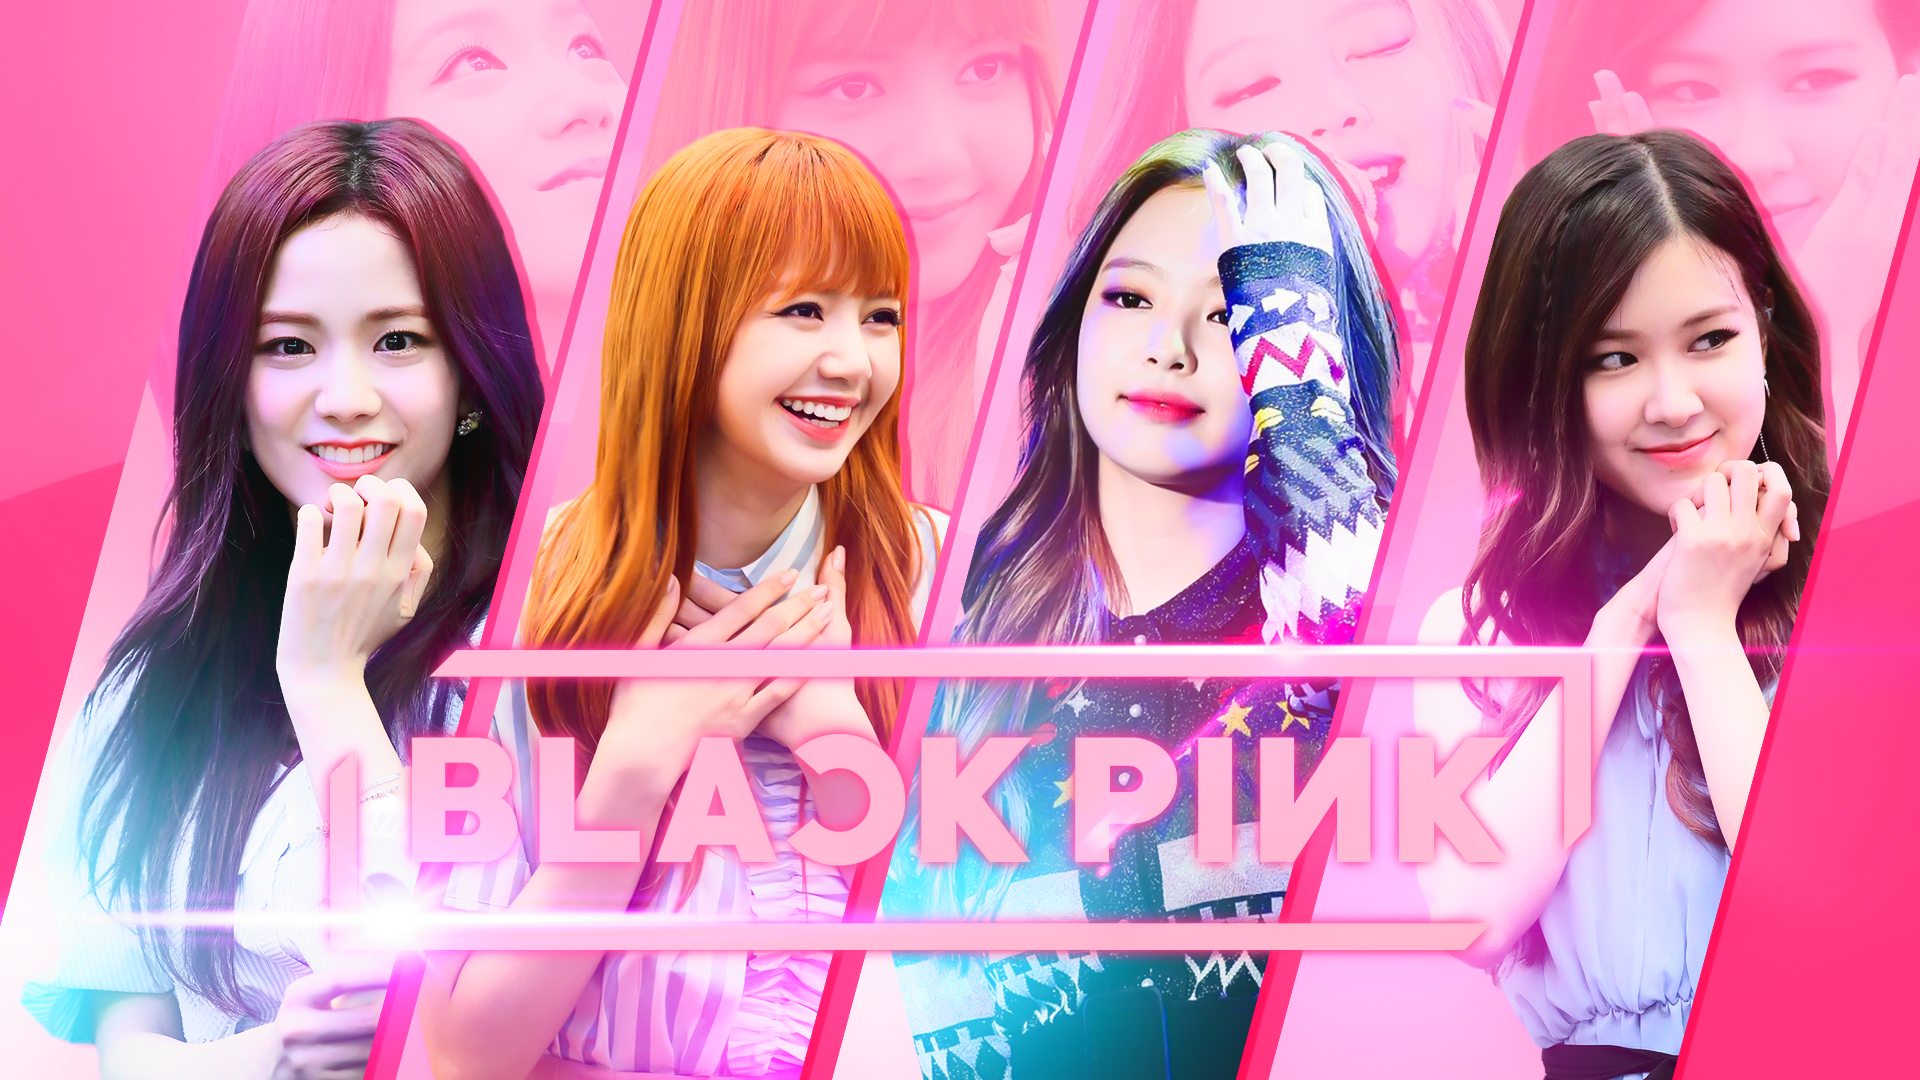 Blackpink Blackpink Photos Blackpink Black Pink Background Images